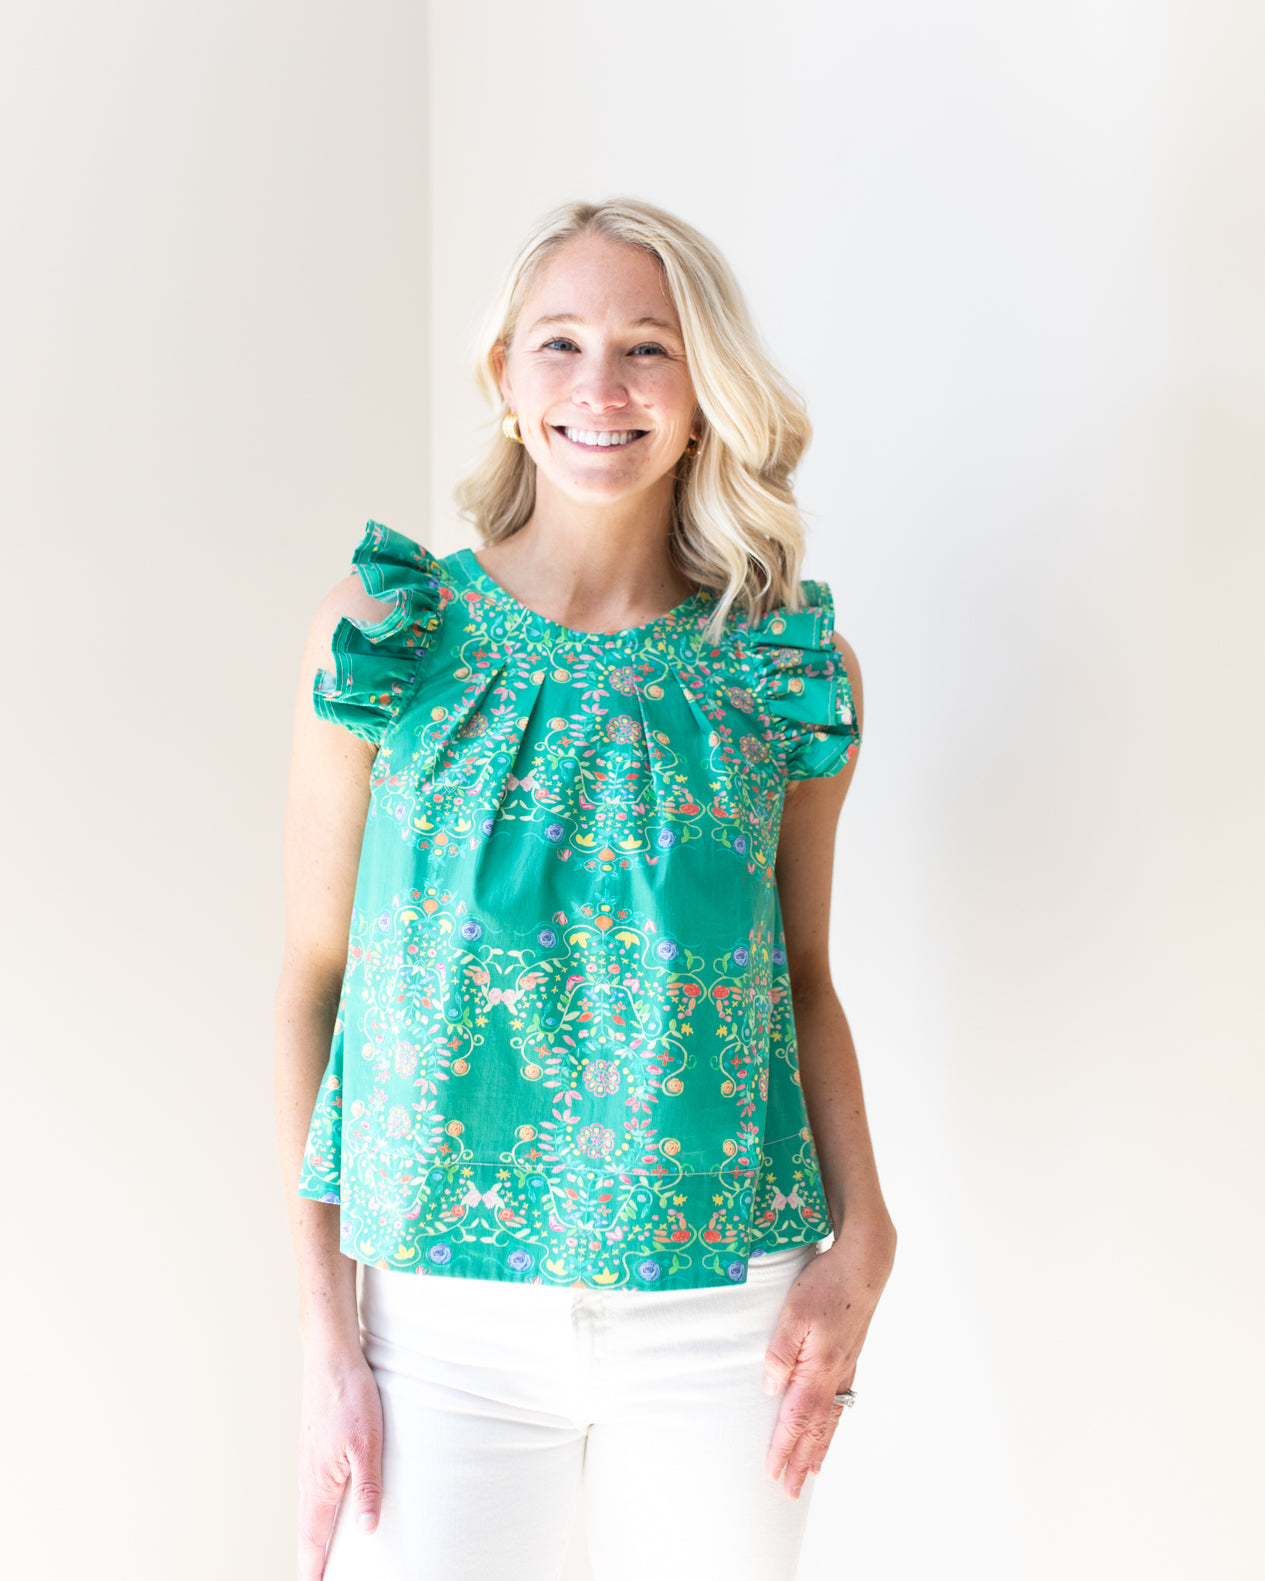 The Charlie Top in Green Embroidery by Brooke Wright